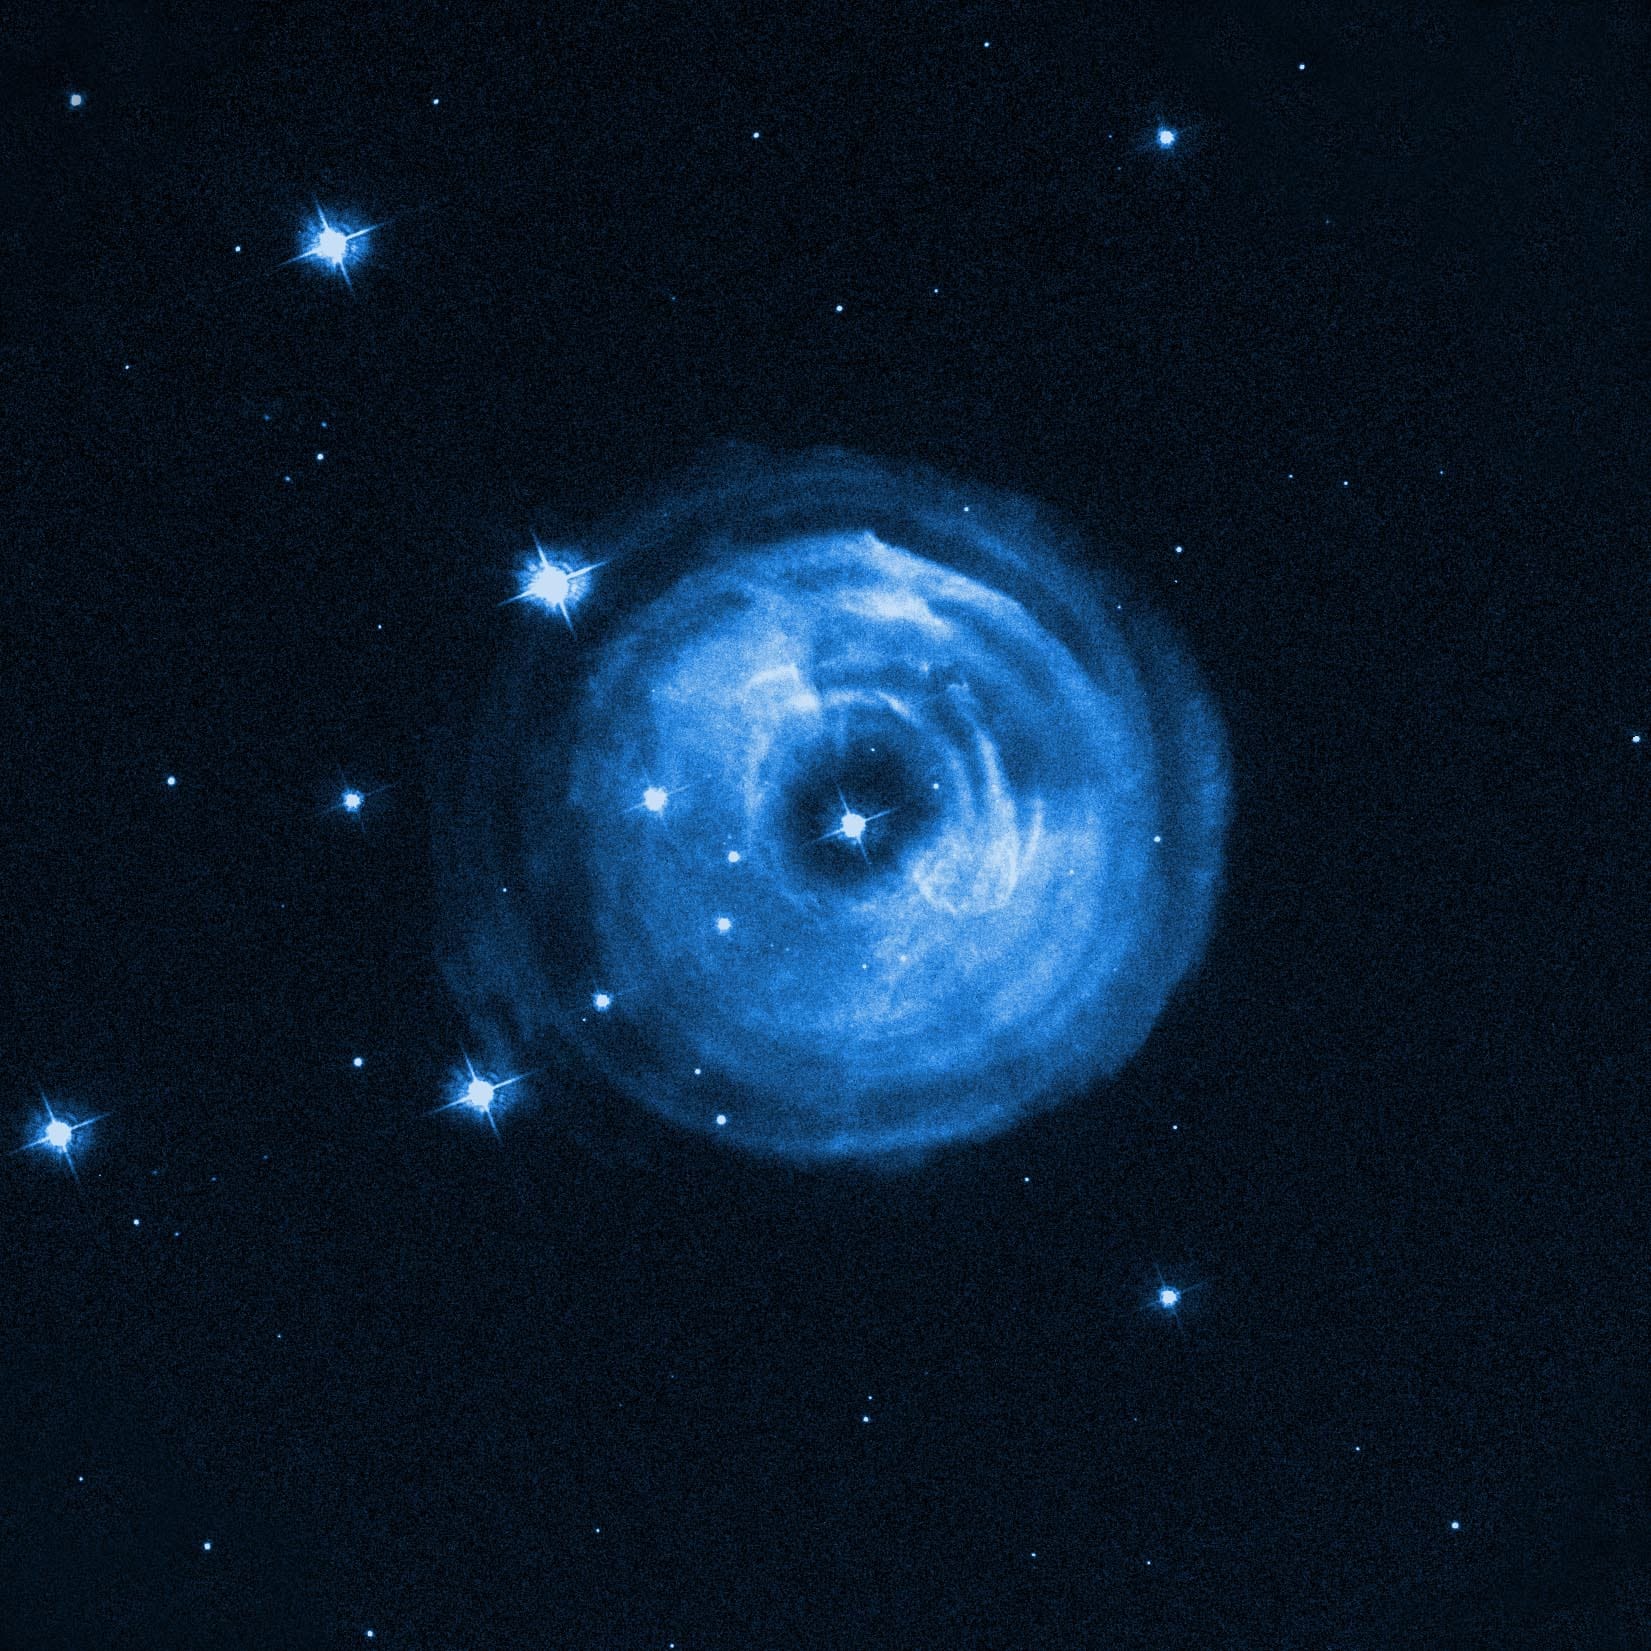 Image: Star V838 Monocerotis In 2002, a dim star suddenly became 600,000 times more luminous than our Sun, temporarily making it the brightest star in our Milky Way galaxy. This image of V838 Monocerotis captures its "light echo."